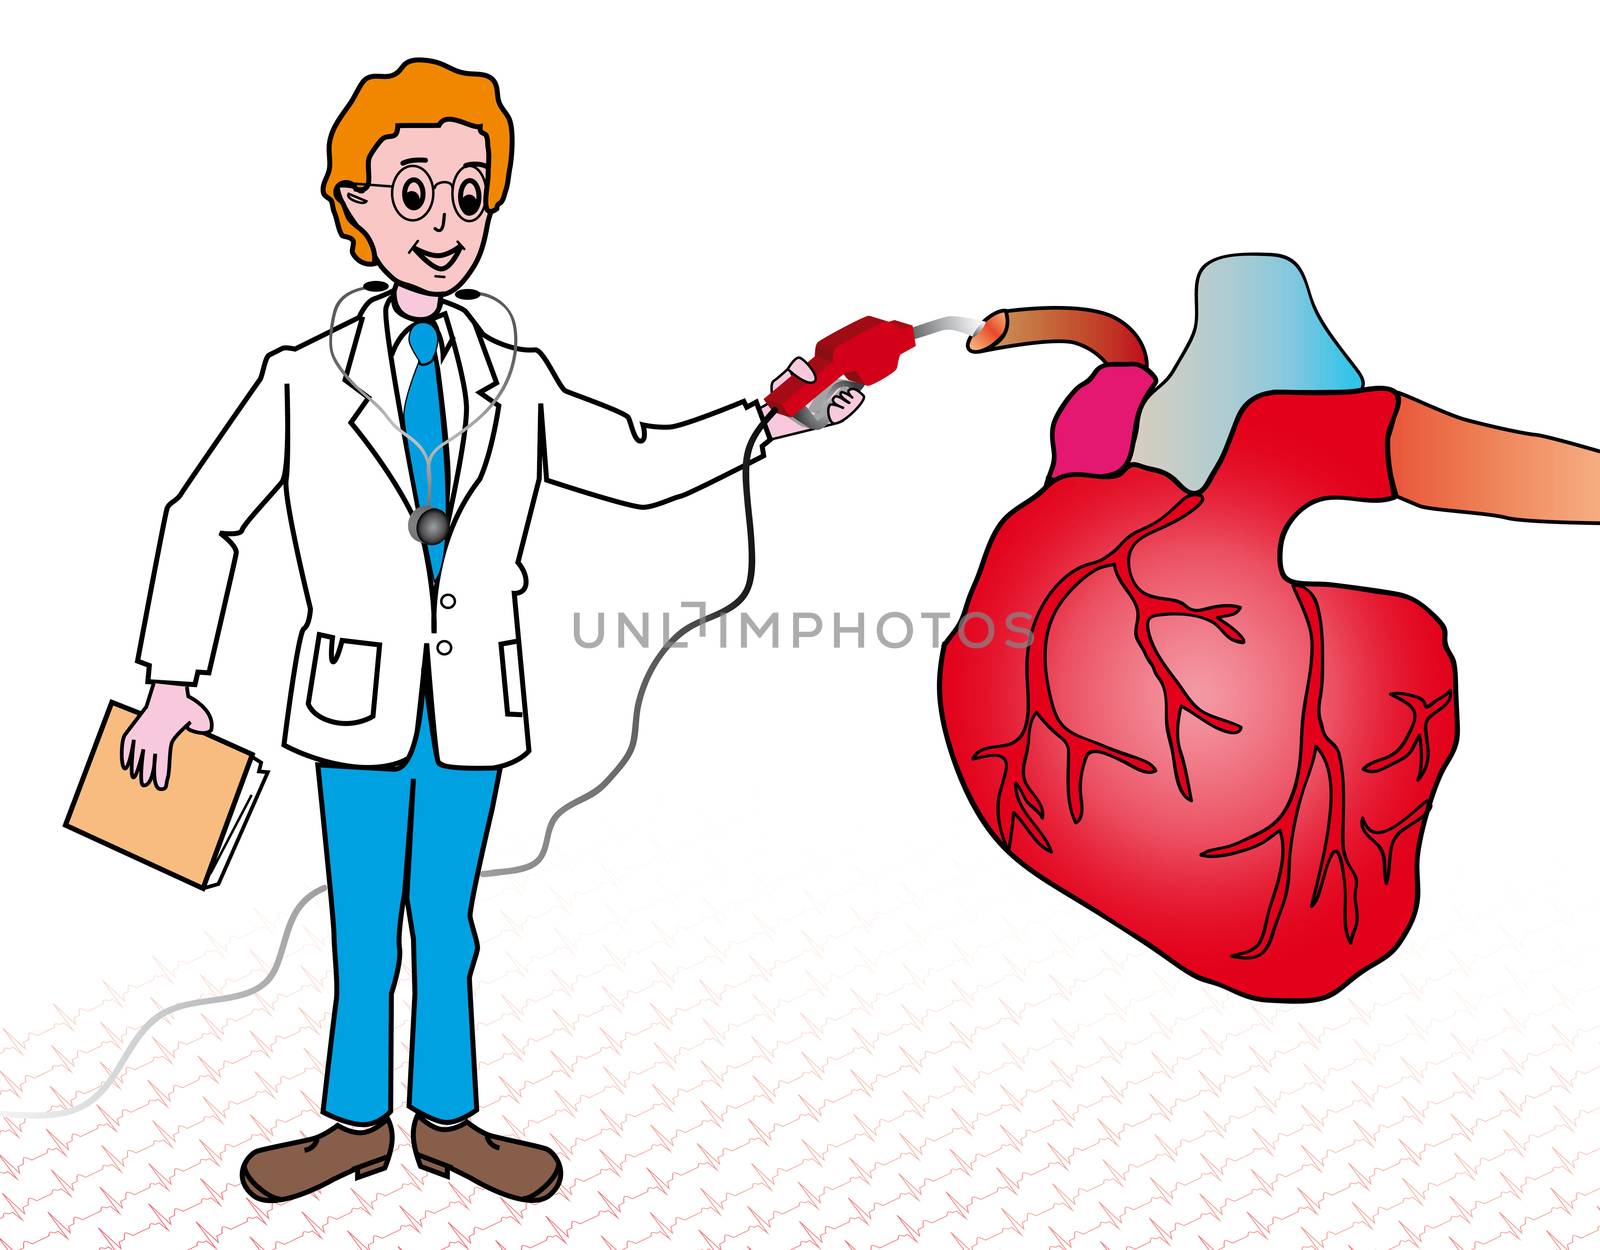 drawing of a heart and a medical doctor with a stethoscope looking after a heart for a heart problem